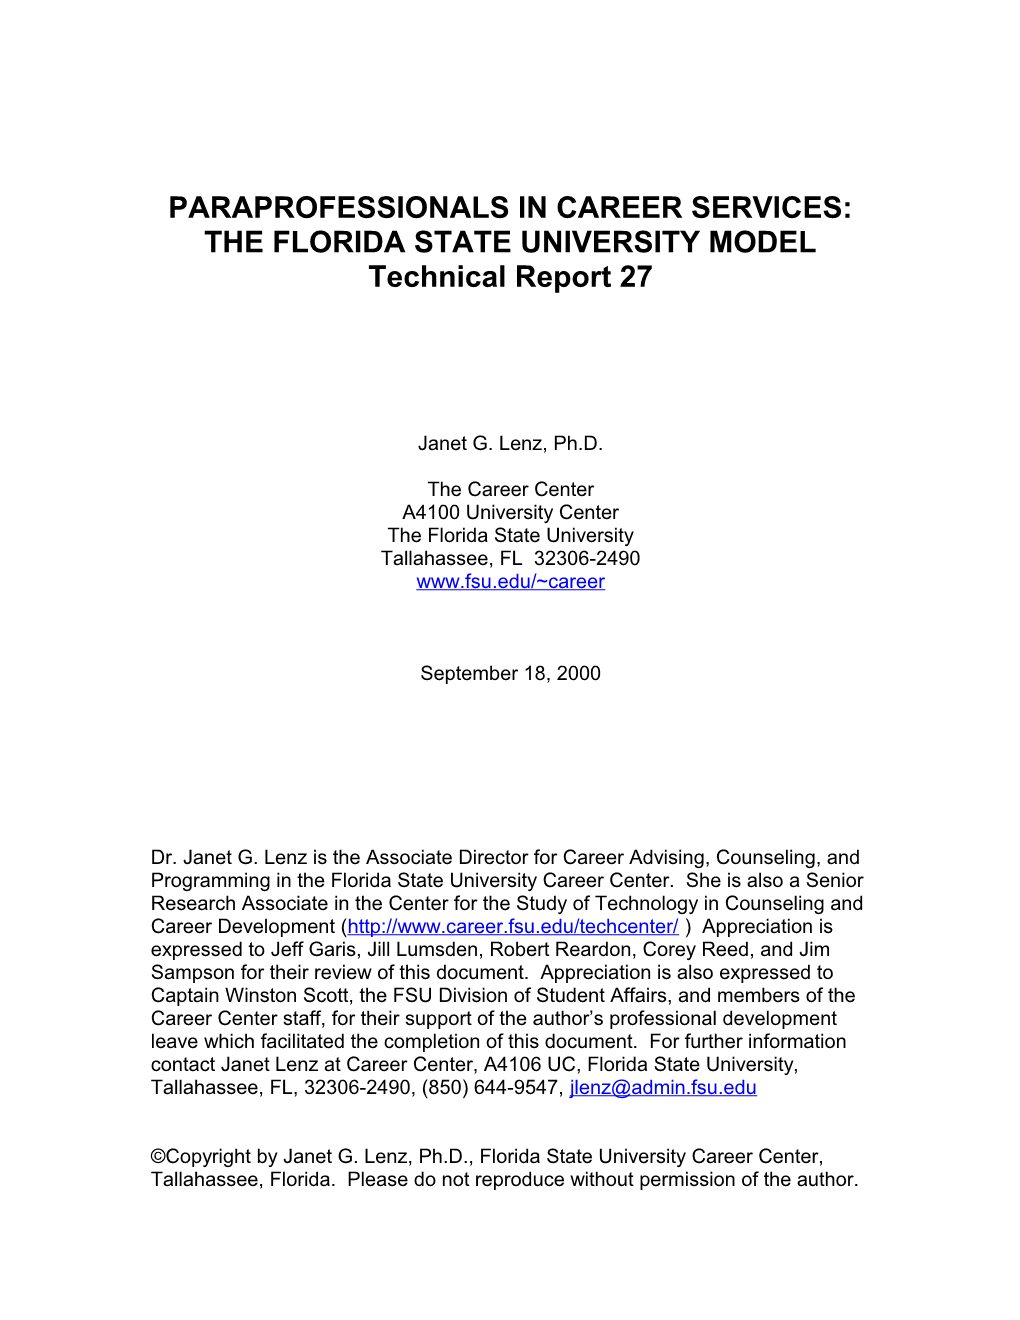 Paraprofessionals in Career Services: the Florida Stat E University Model